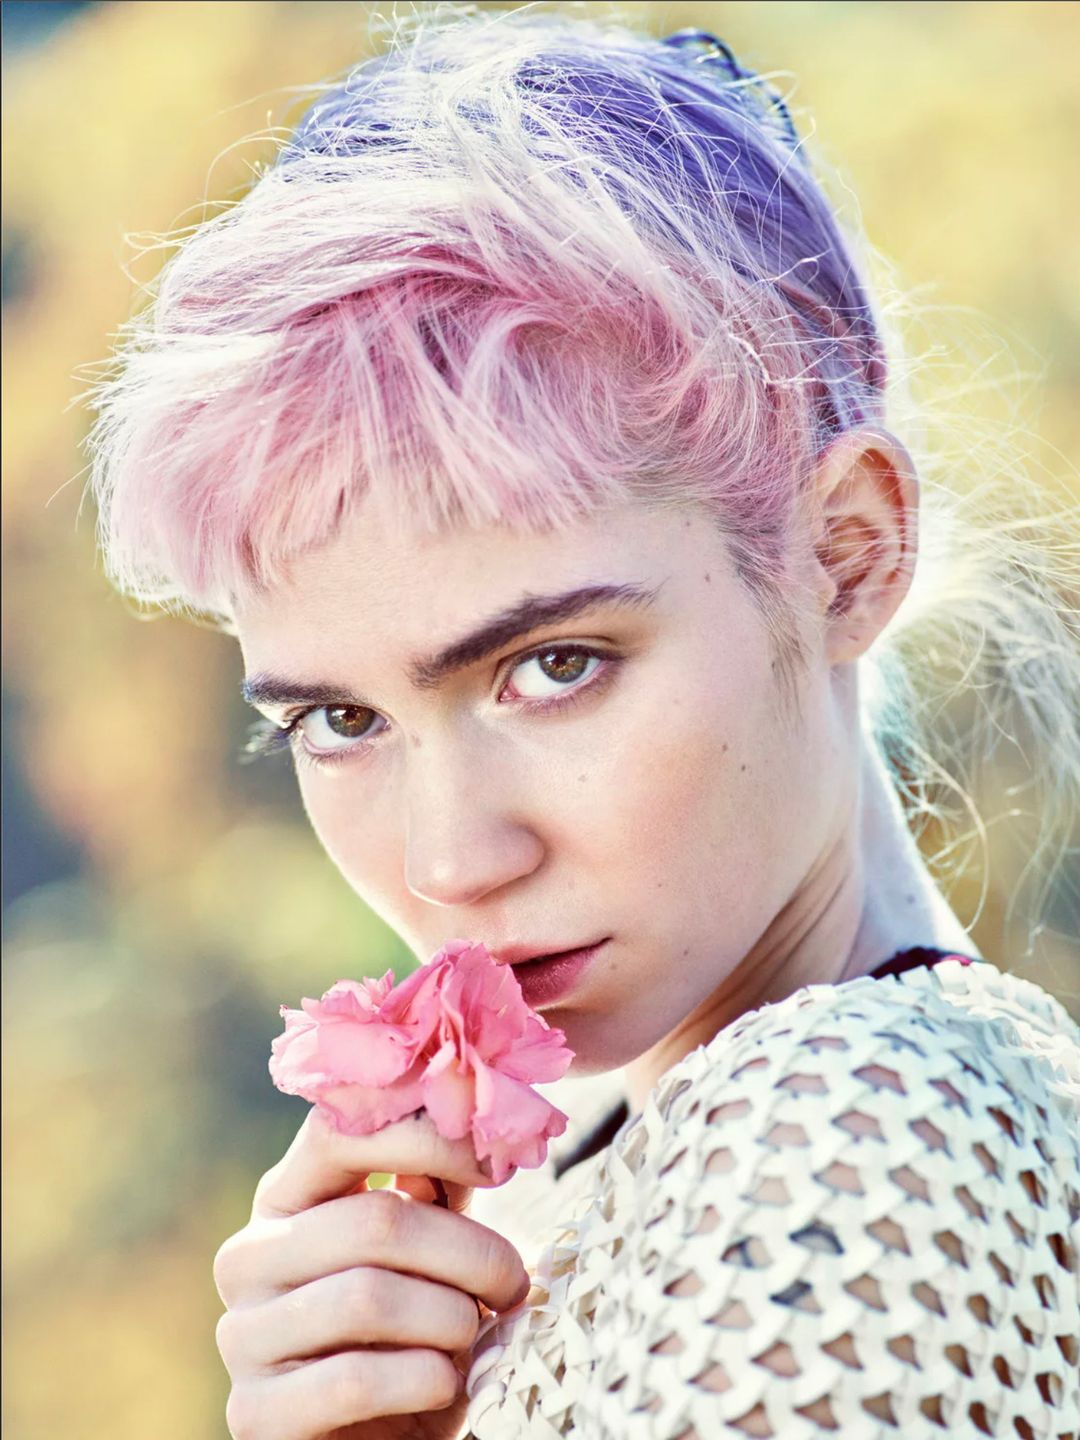 Grimes who is her father